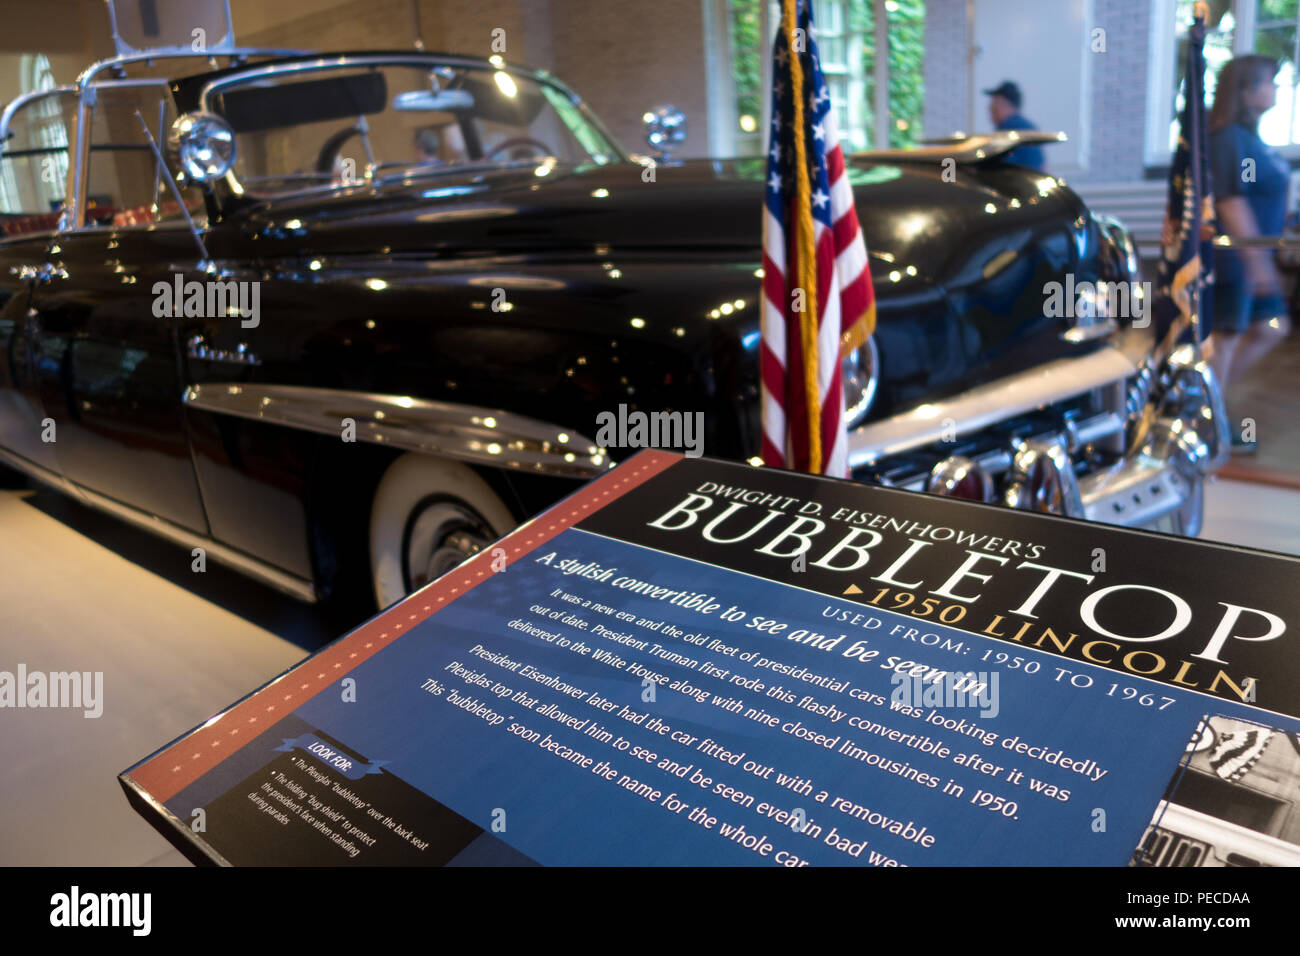 1950 Lincoln Bubbletop Dwight D Eisenhower Henry Ford Museum historic president presidential car - Henry Ford Museum of American Innovation, Dearborn Stock Photo